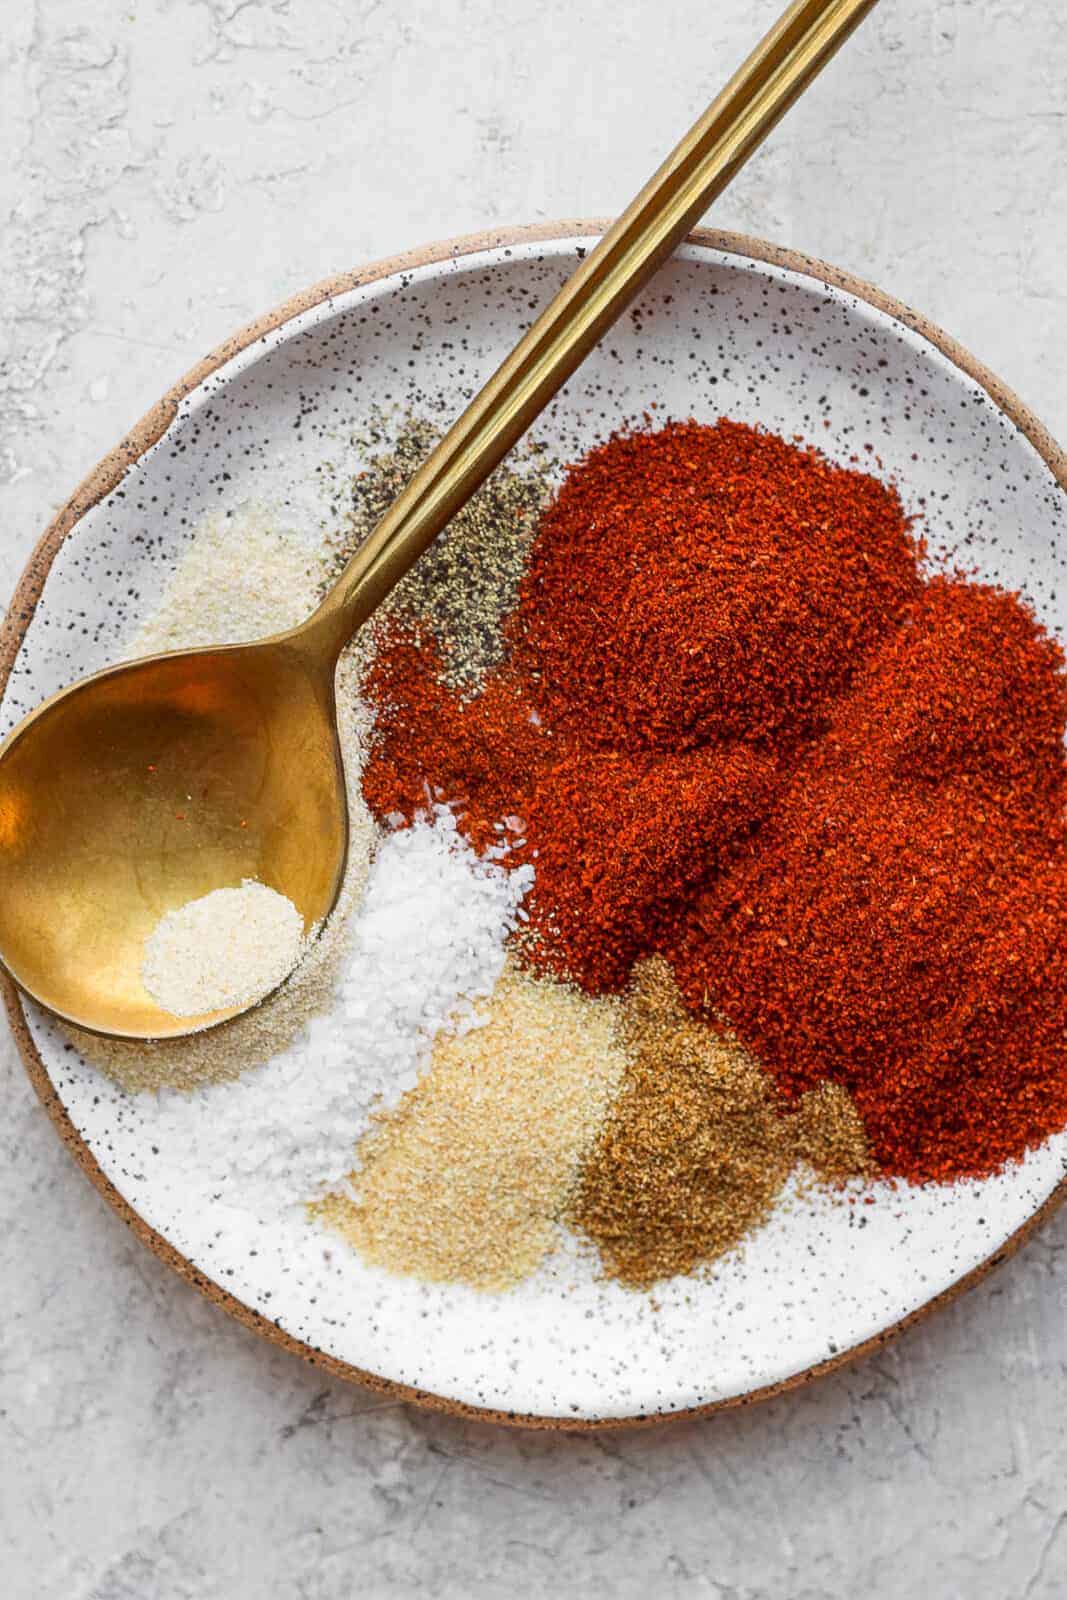 Chili seasoning ingredients on a plate.